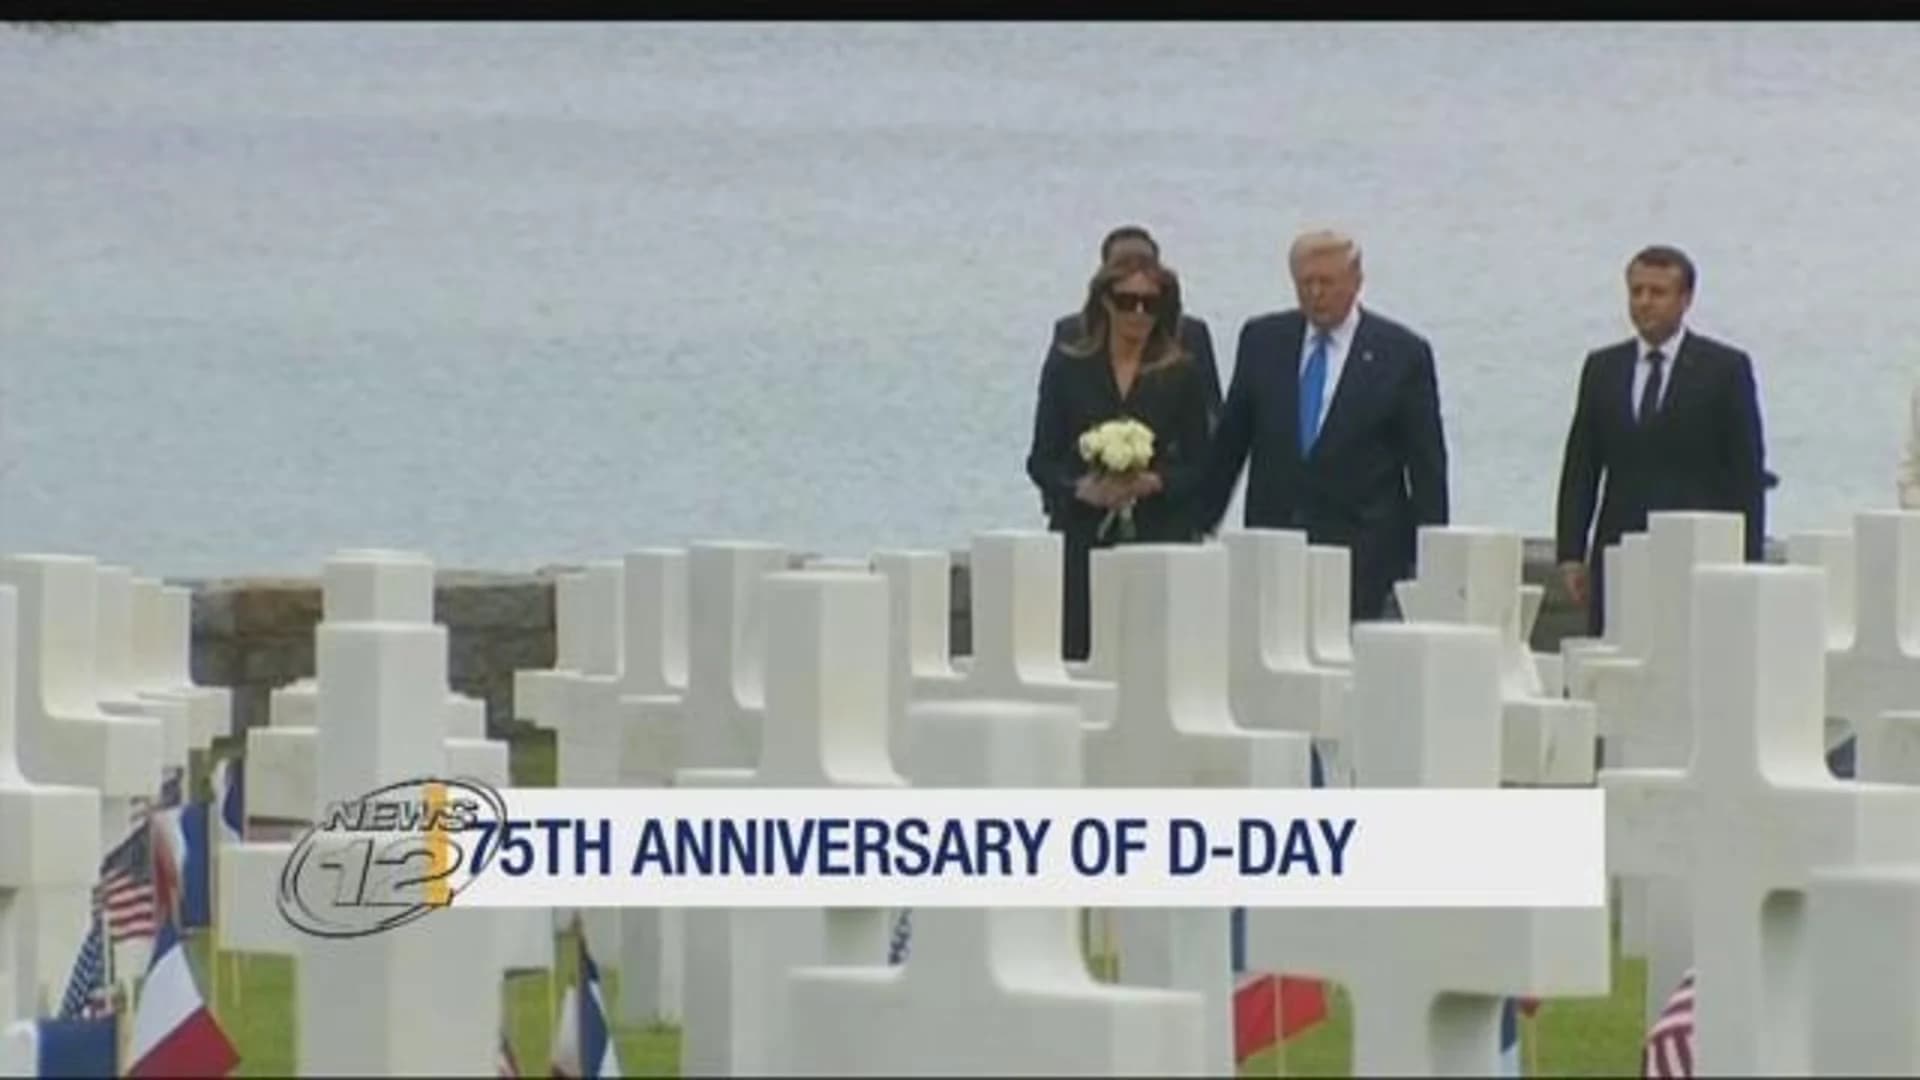 D-Day 75: Nations honor veterans, memory of fallen troops